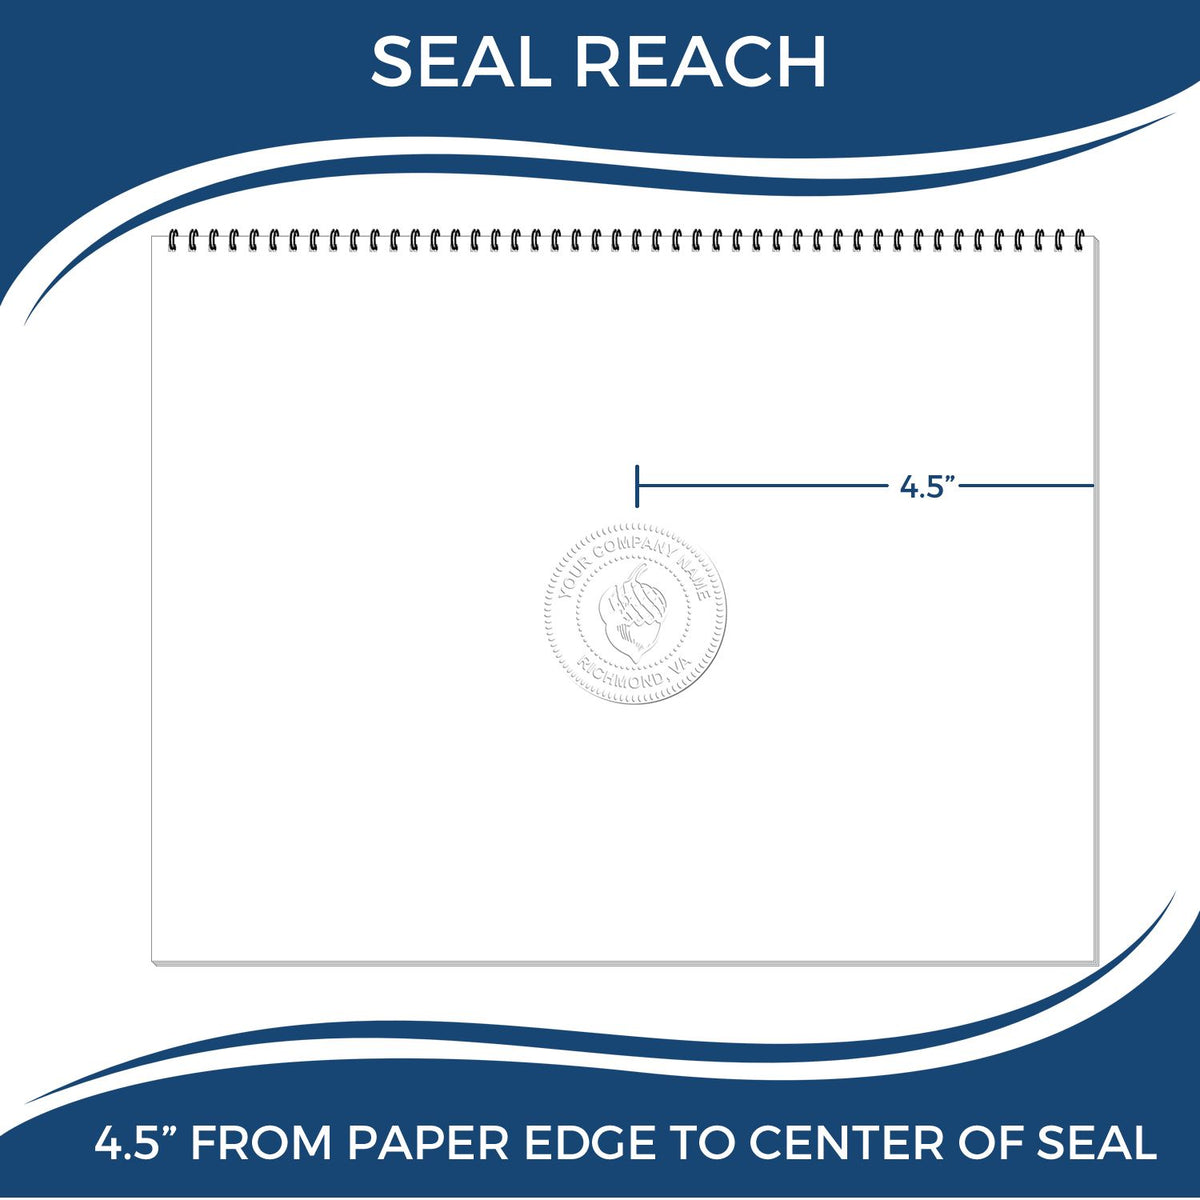 An infographic showing the seal reach which is represented by a ruler and a miniature seal image of the State of West Virginia Extended Long Reach Engineer Seal